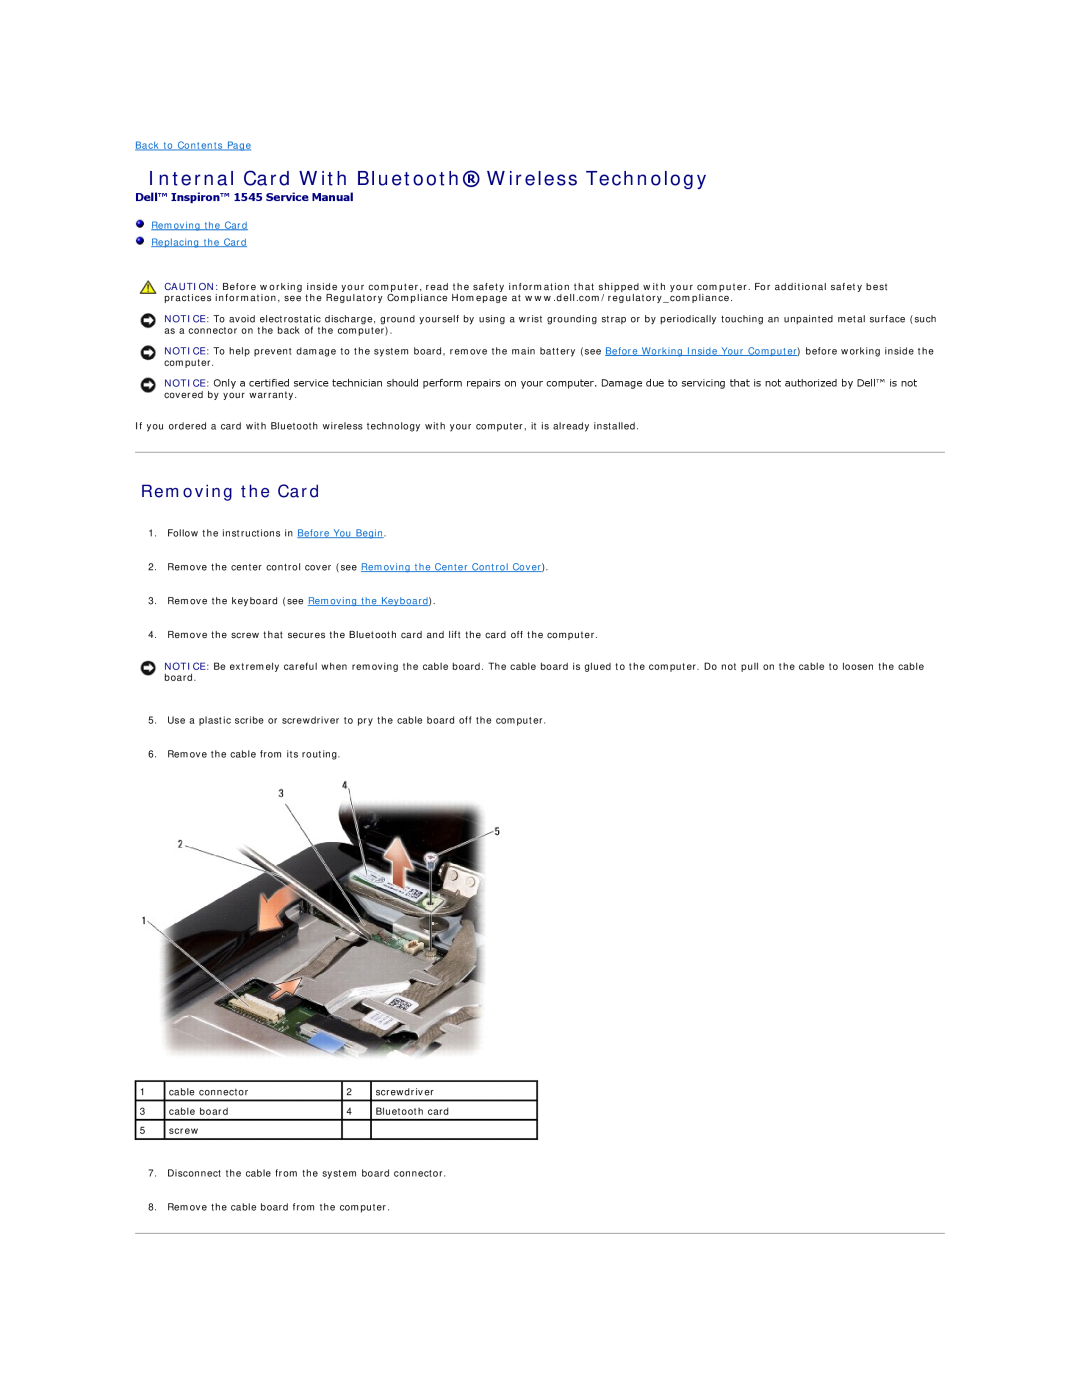 Dell 1545 manual Internal Card With Bluetooth Wireless Technology, Removing the Card Replacing the Card 